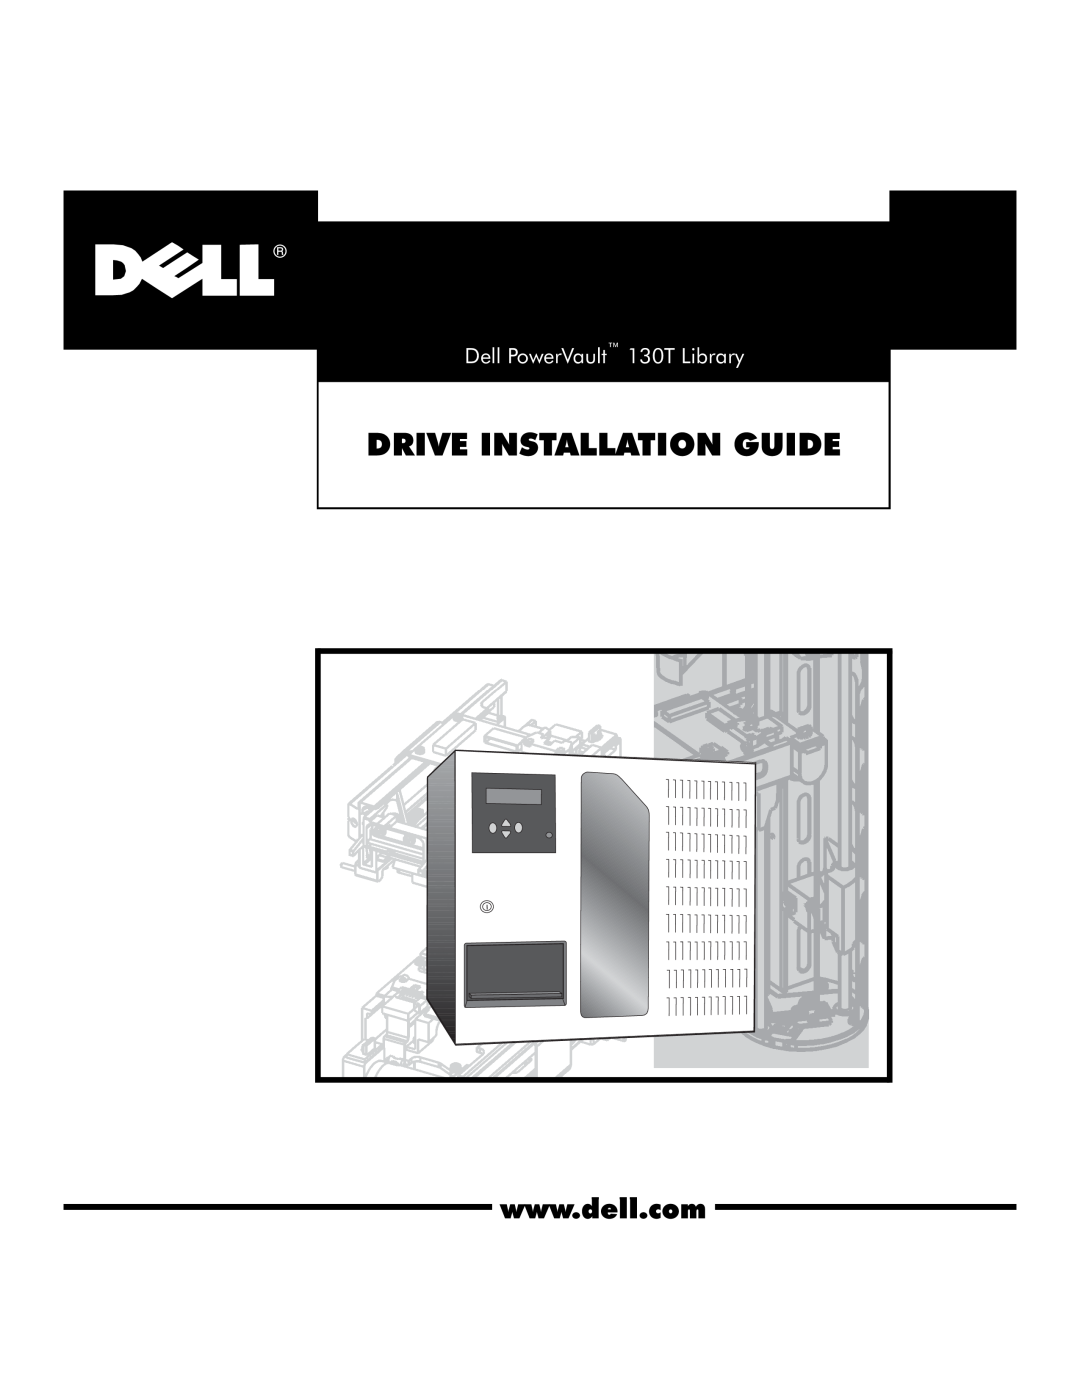 Dell 35F, 130T, 120T manual PowerVault Fibre Channel Utilities Ver, sion 2.0 CD or the Dell PowerVault 